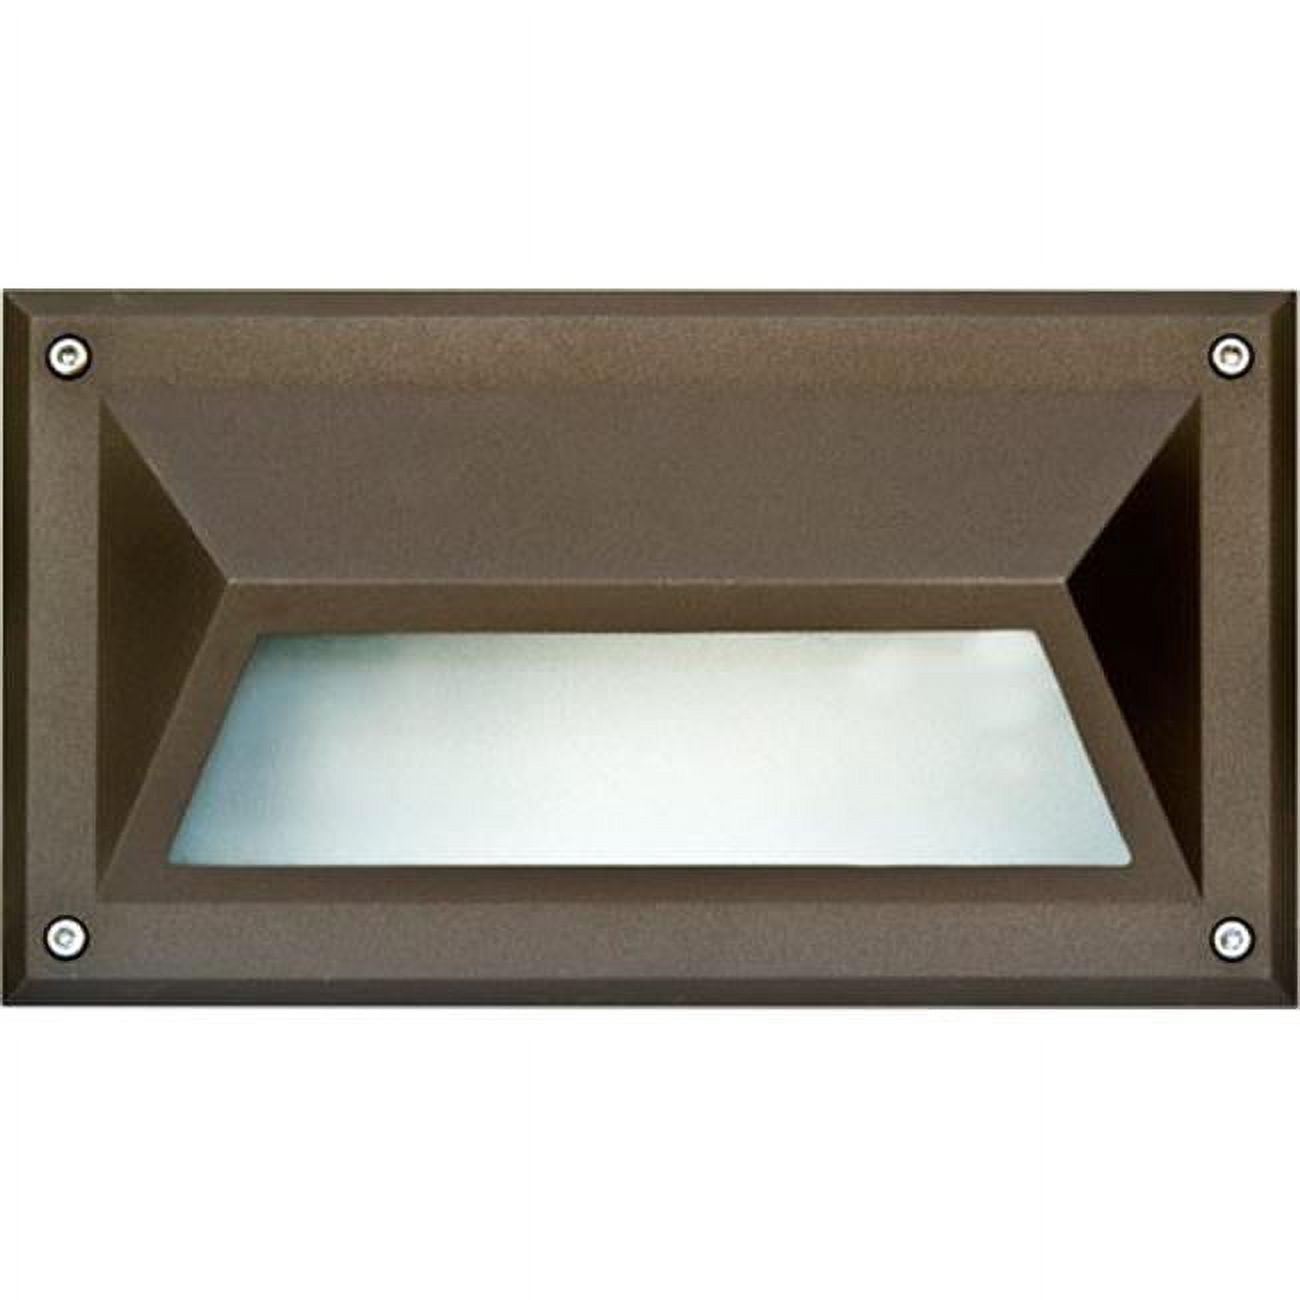 Picture of Dabmar Lighting DSL1033-BZ Recessed Hooded Brick, Step & Wall Light, Bronze - 5 x 8.90 x 3.75 in.